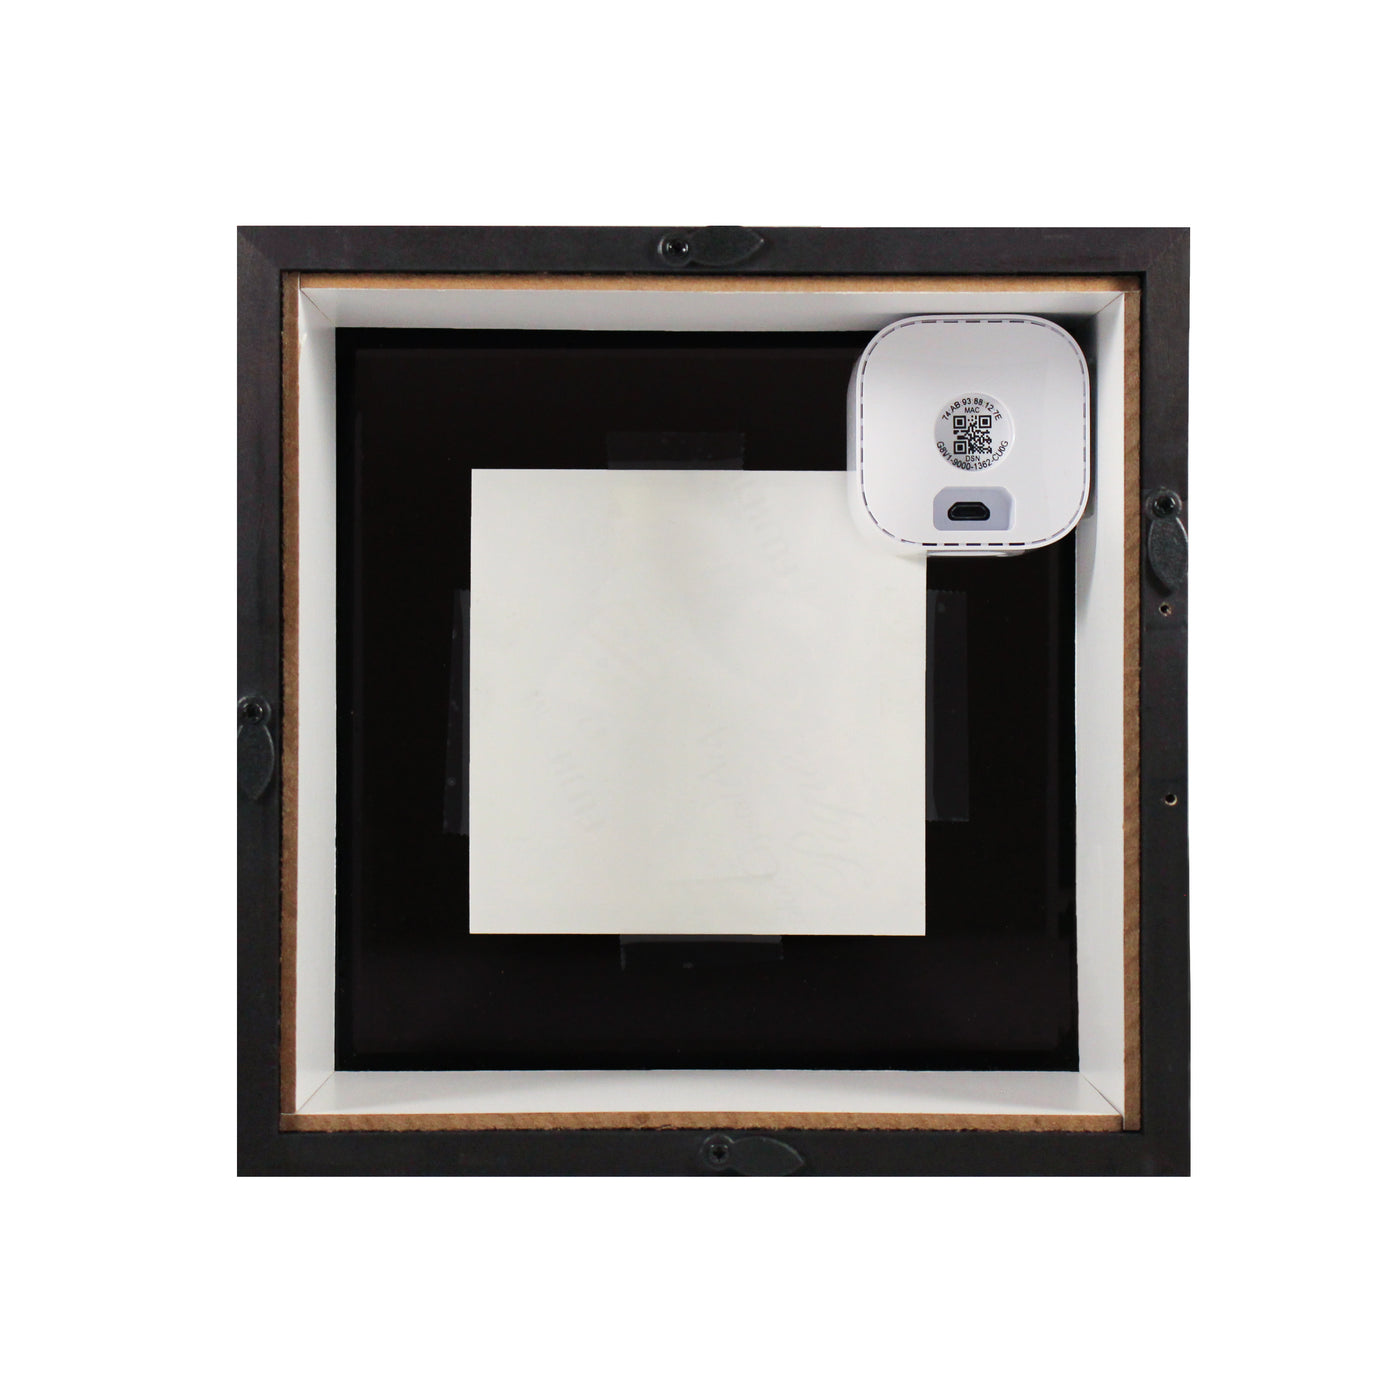 The back side of a picture frame with a piece of black film, the backside of a picture, and the back of a security camera visible.